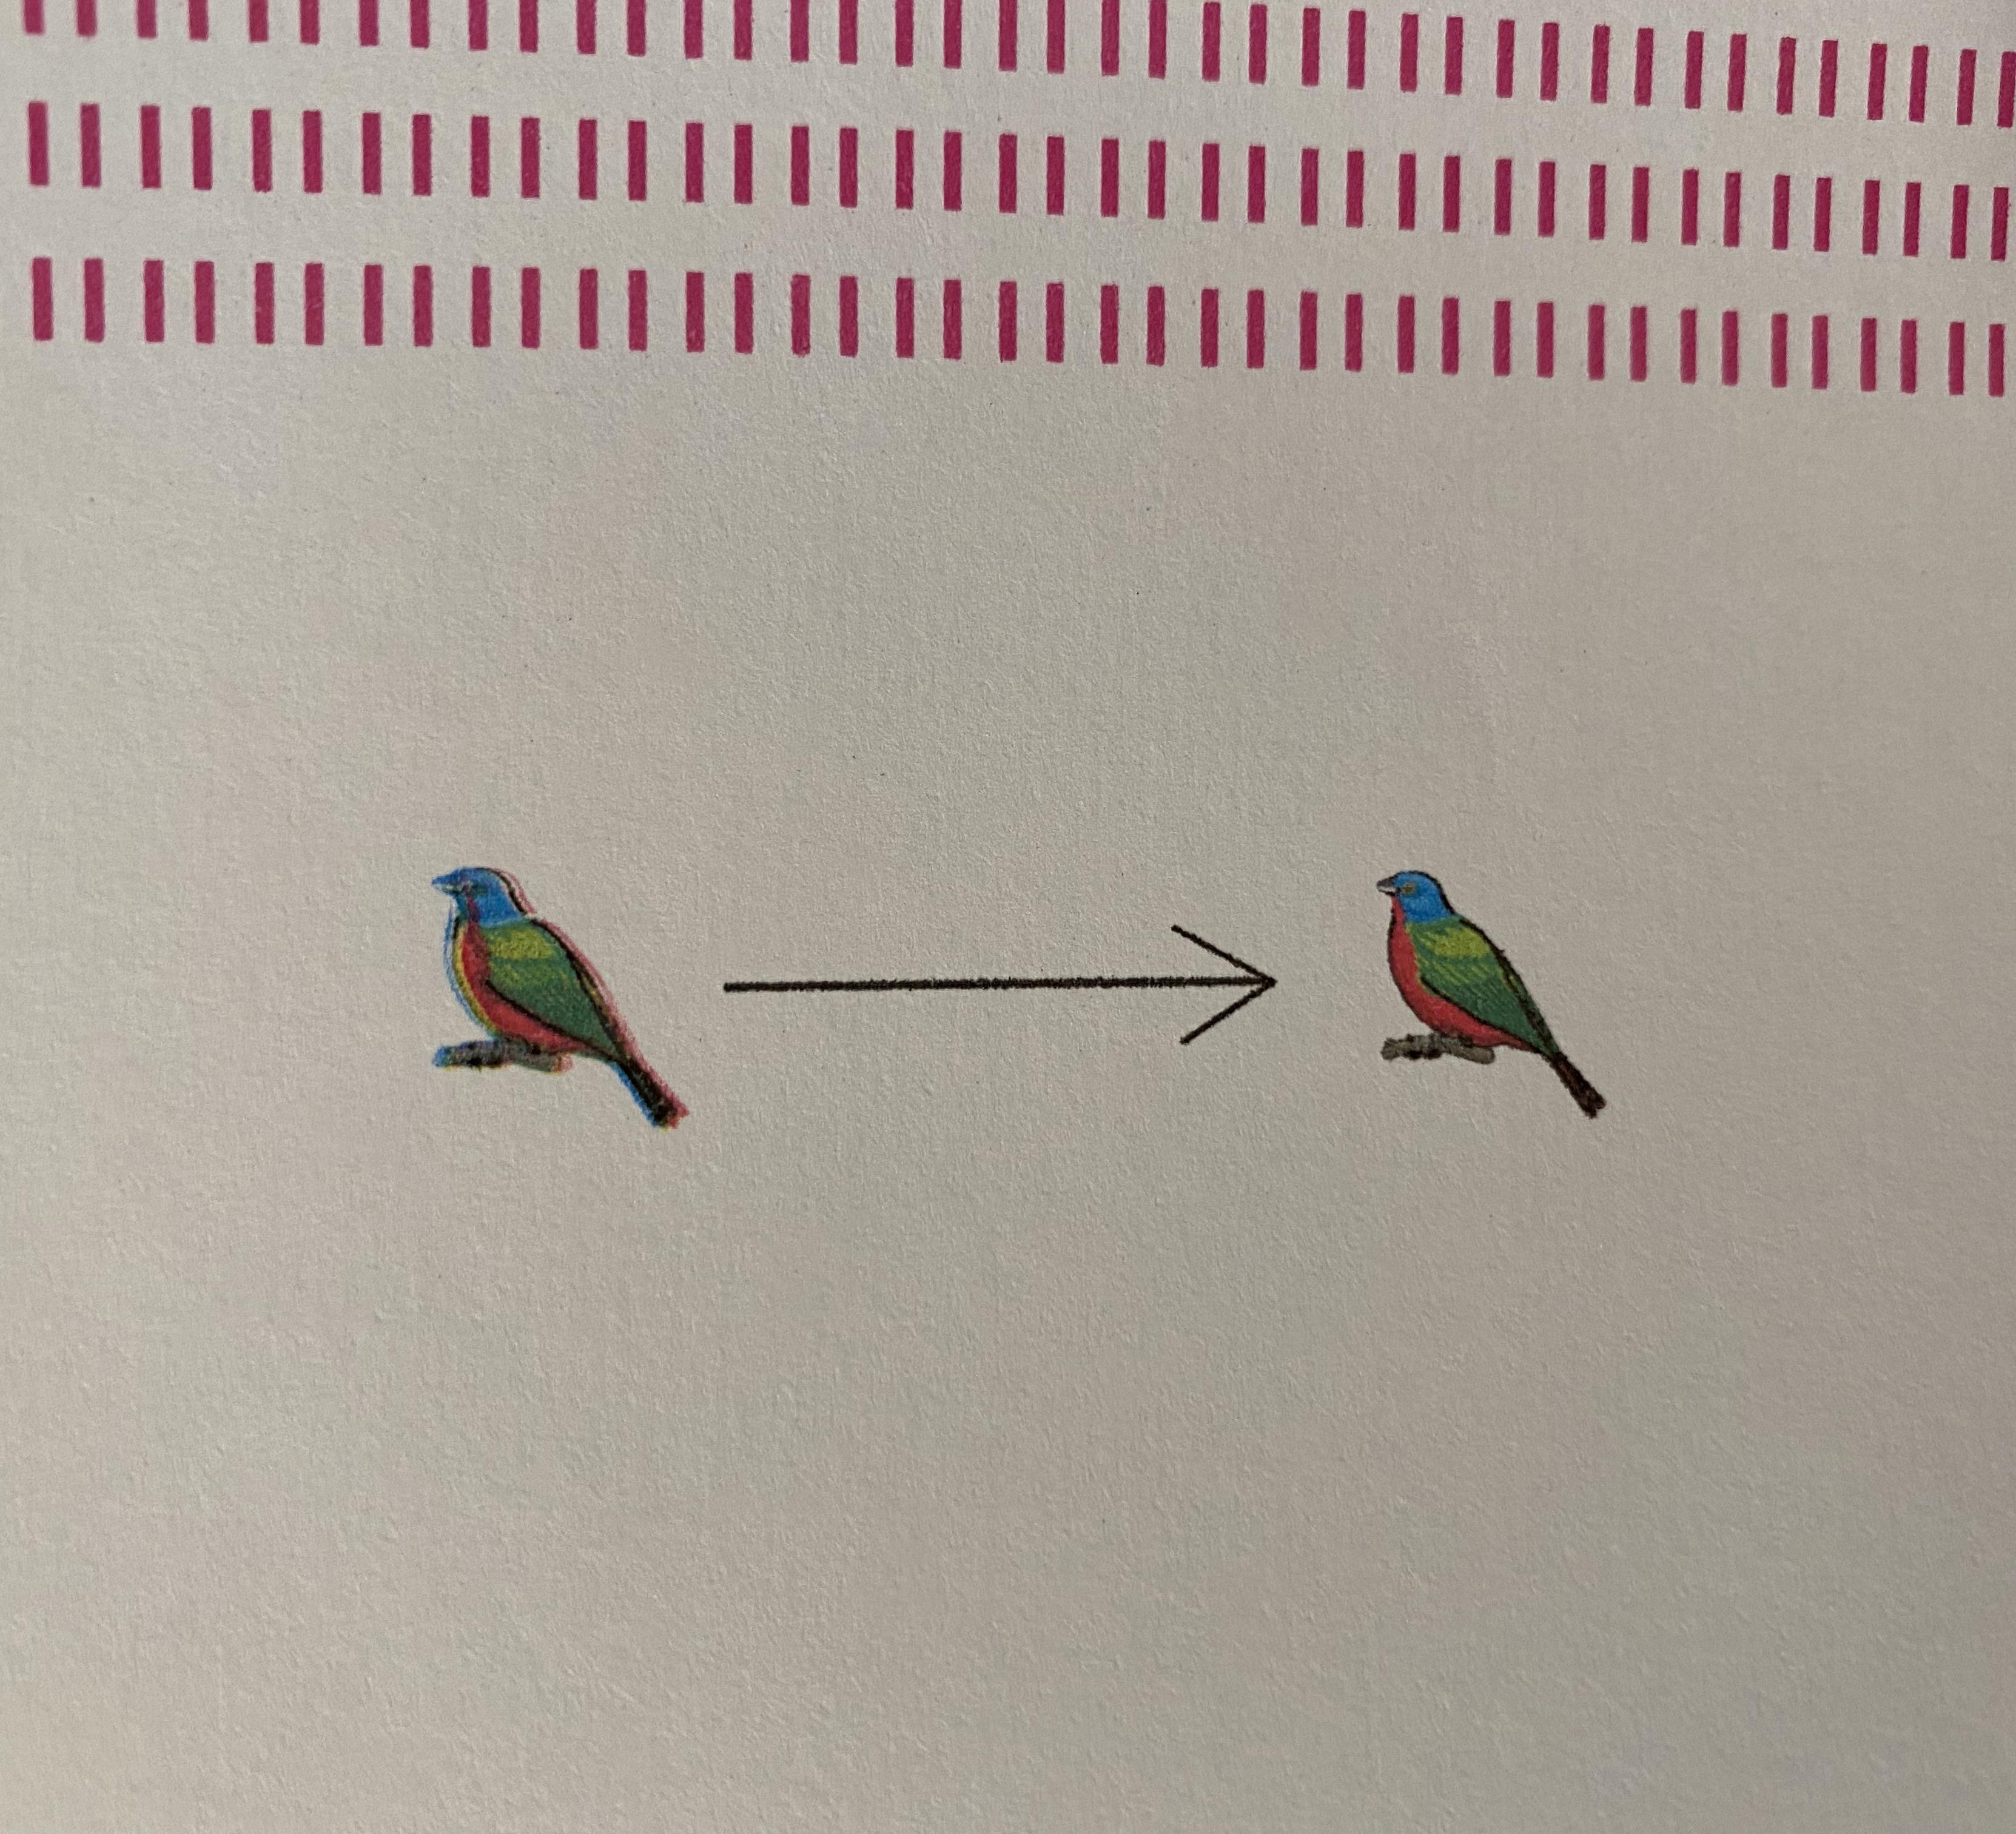 Before and after printer alignment. FYI. 